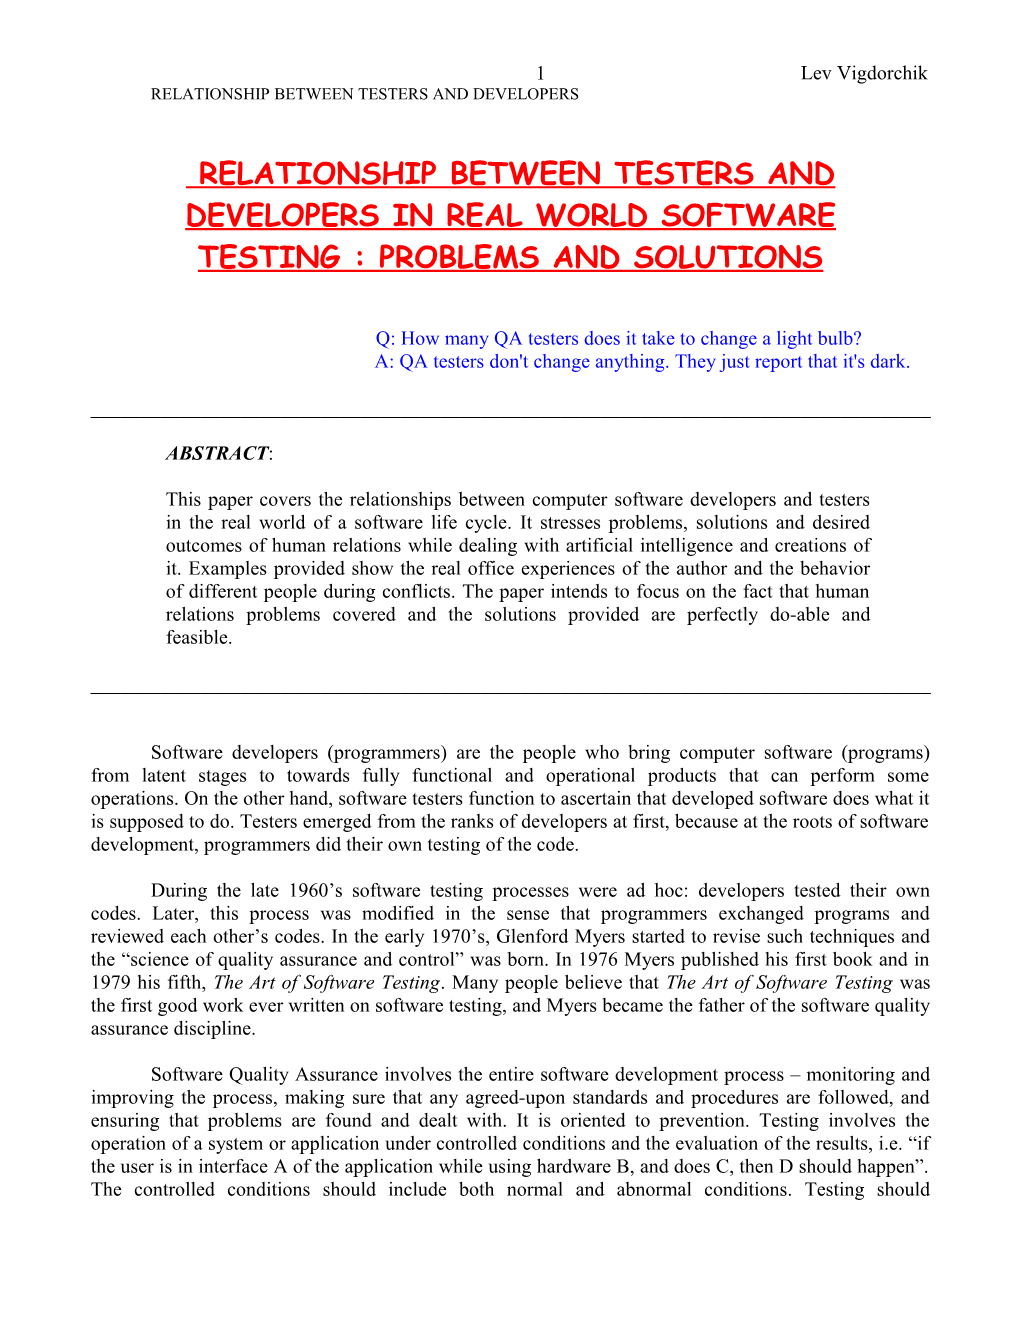 Relationship Between Testers and Developers in the Real World S Software Testiing : Problems